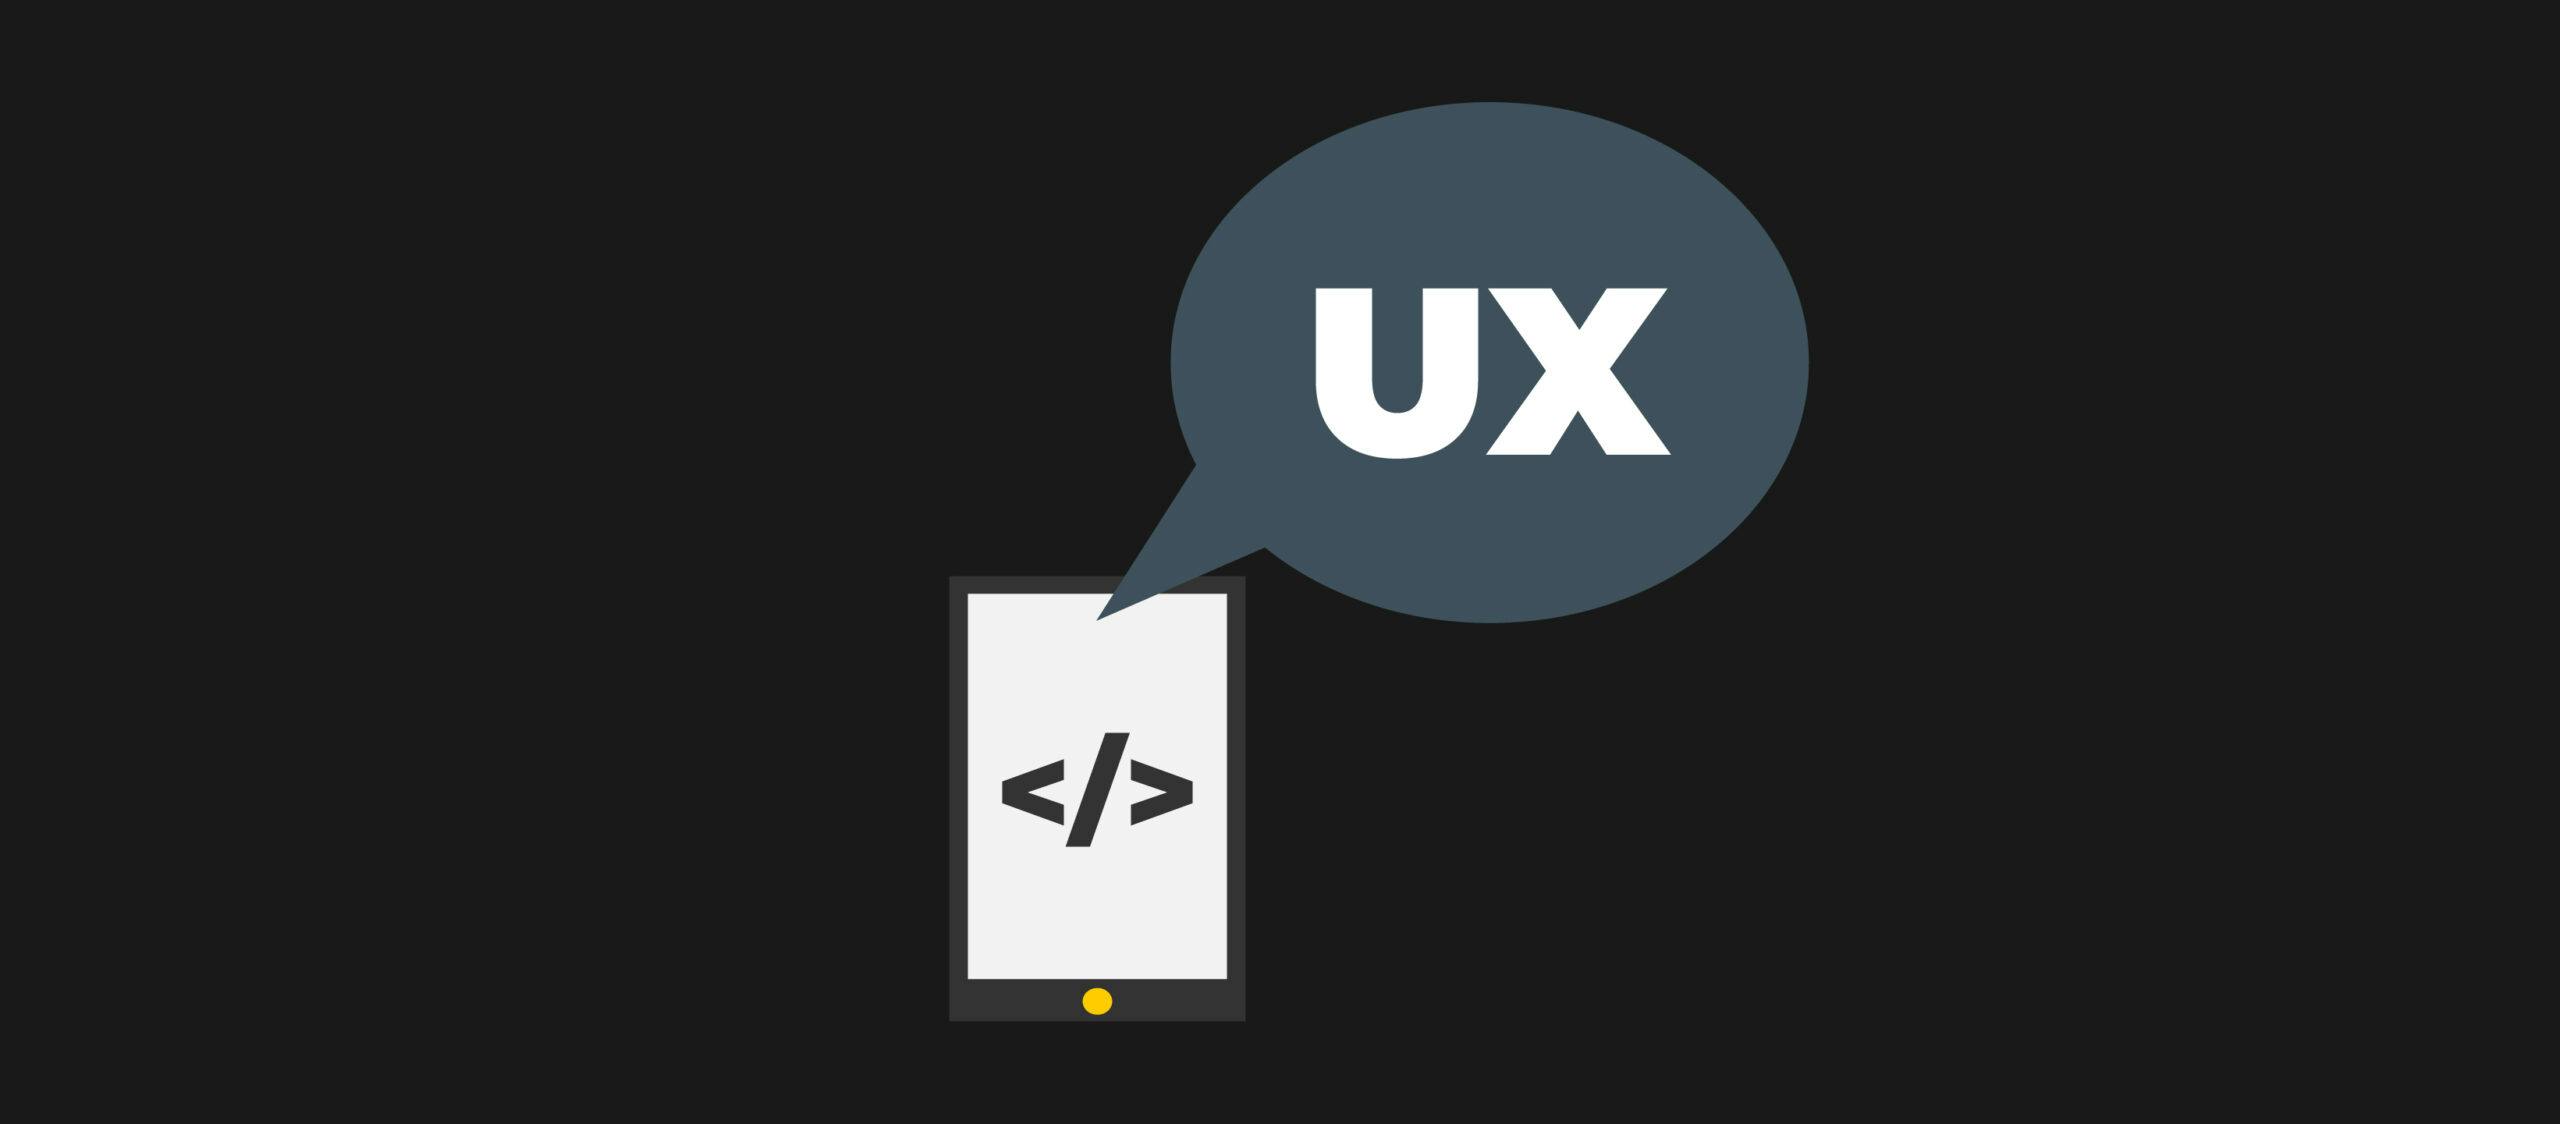 What Makes UX Design a Key Factor in App Development?